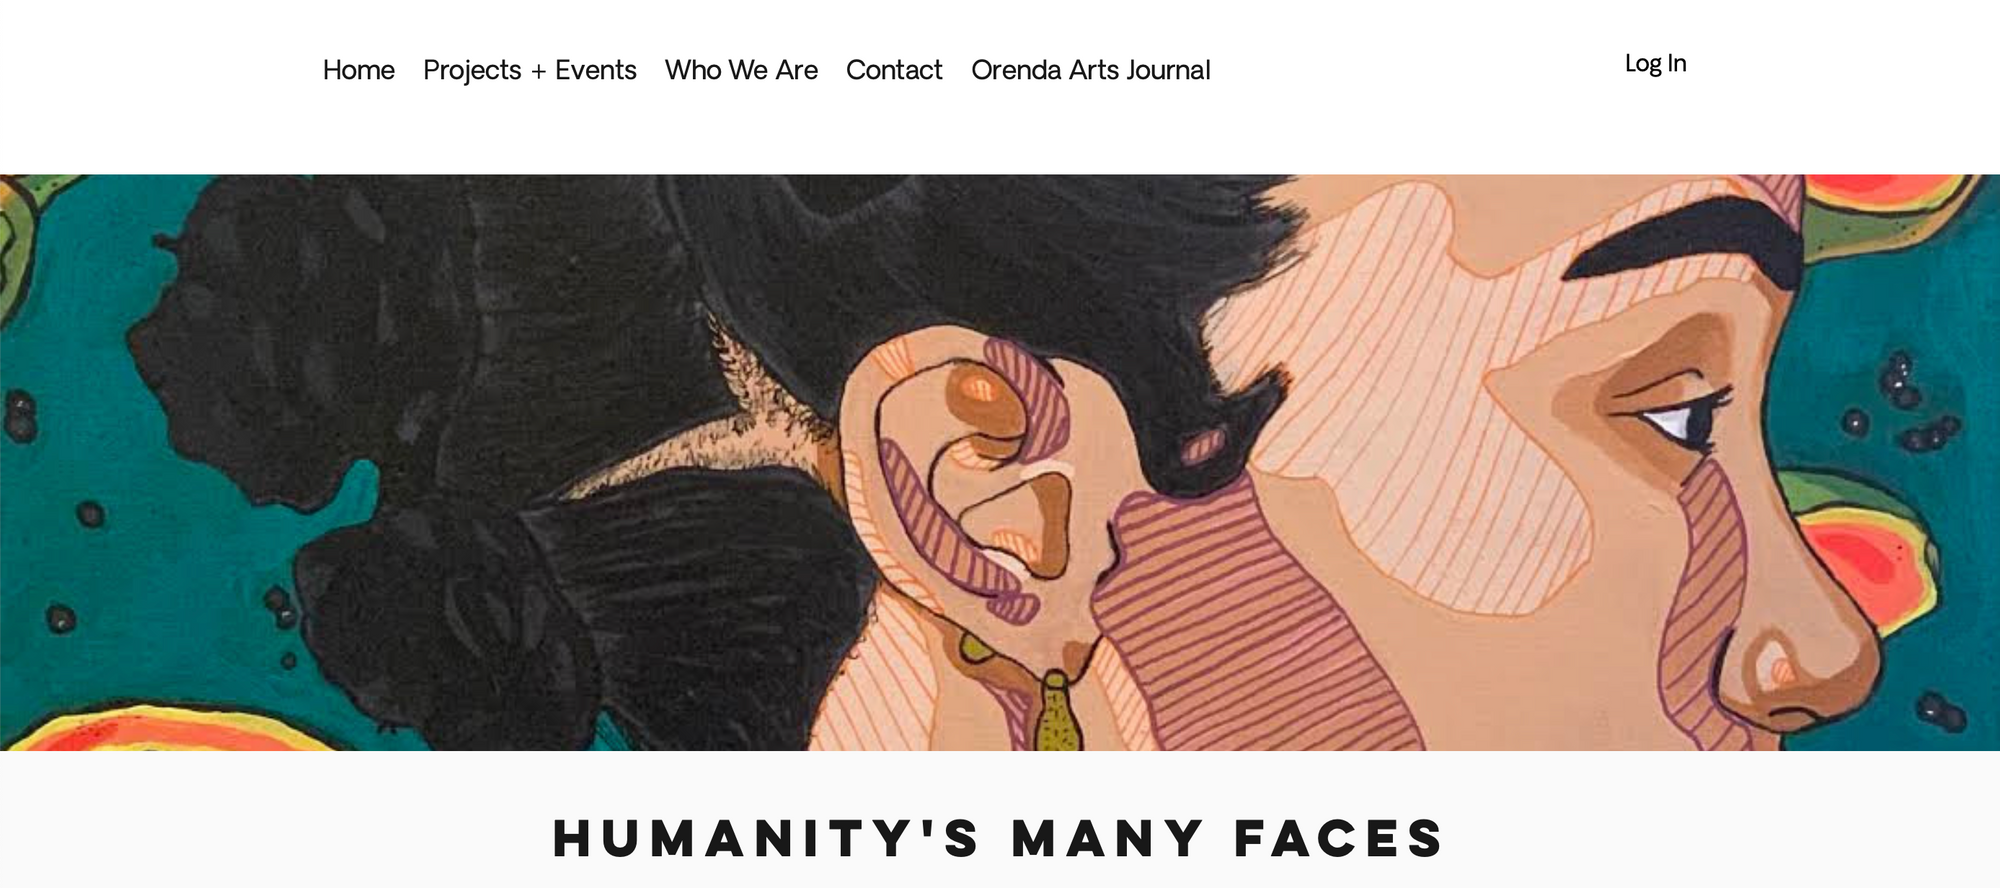 Humanity's Many Faces - Group Show